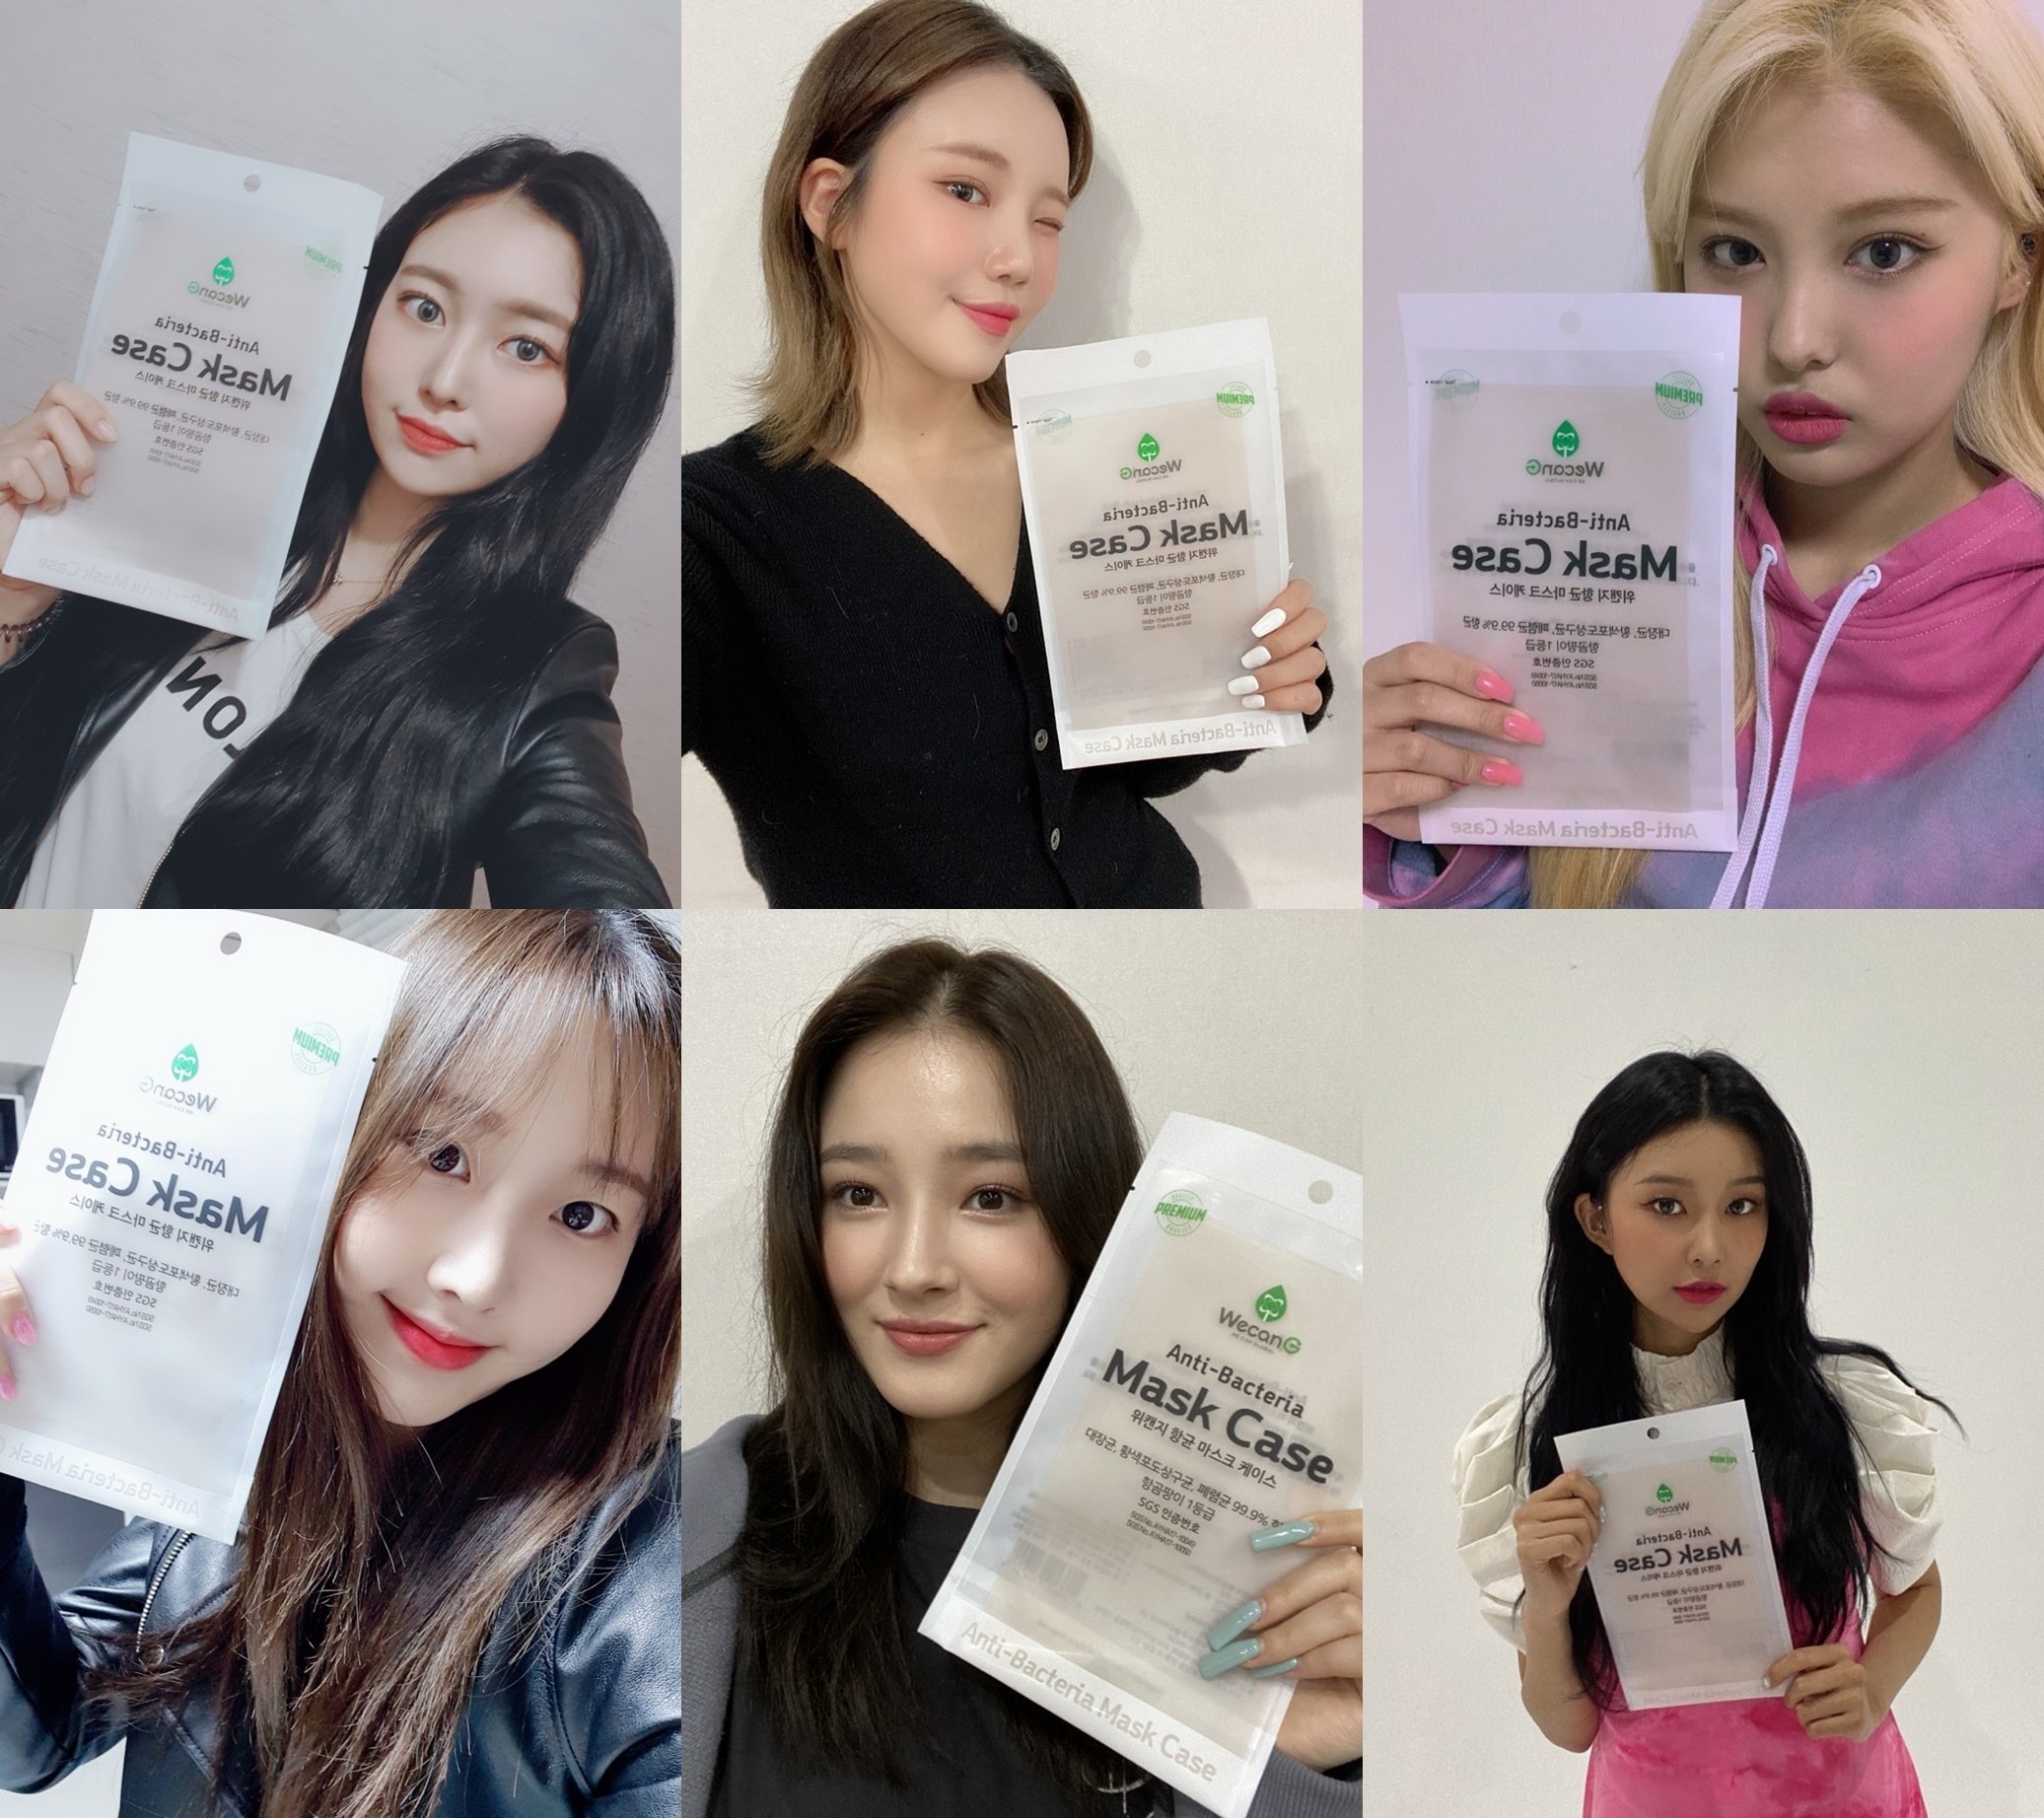 momoland-donates-mask-cases-worth-100-million-won-to-help-covid-19-sufferers-2